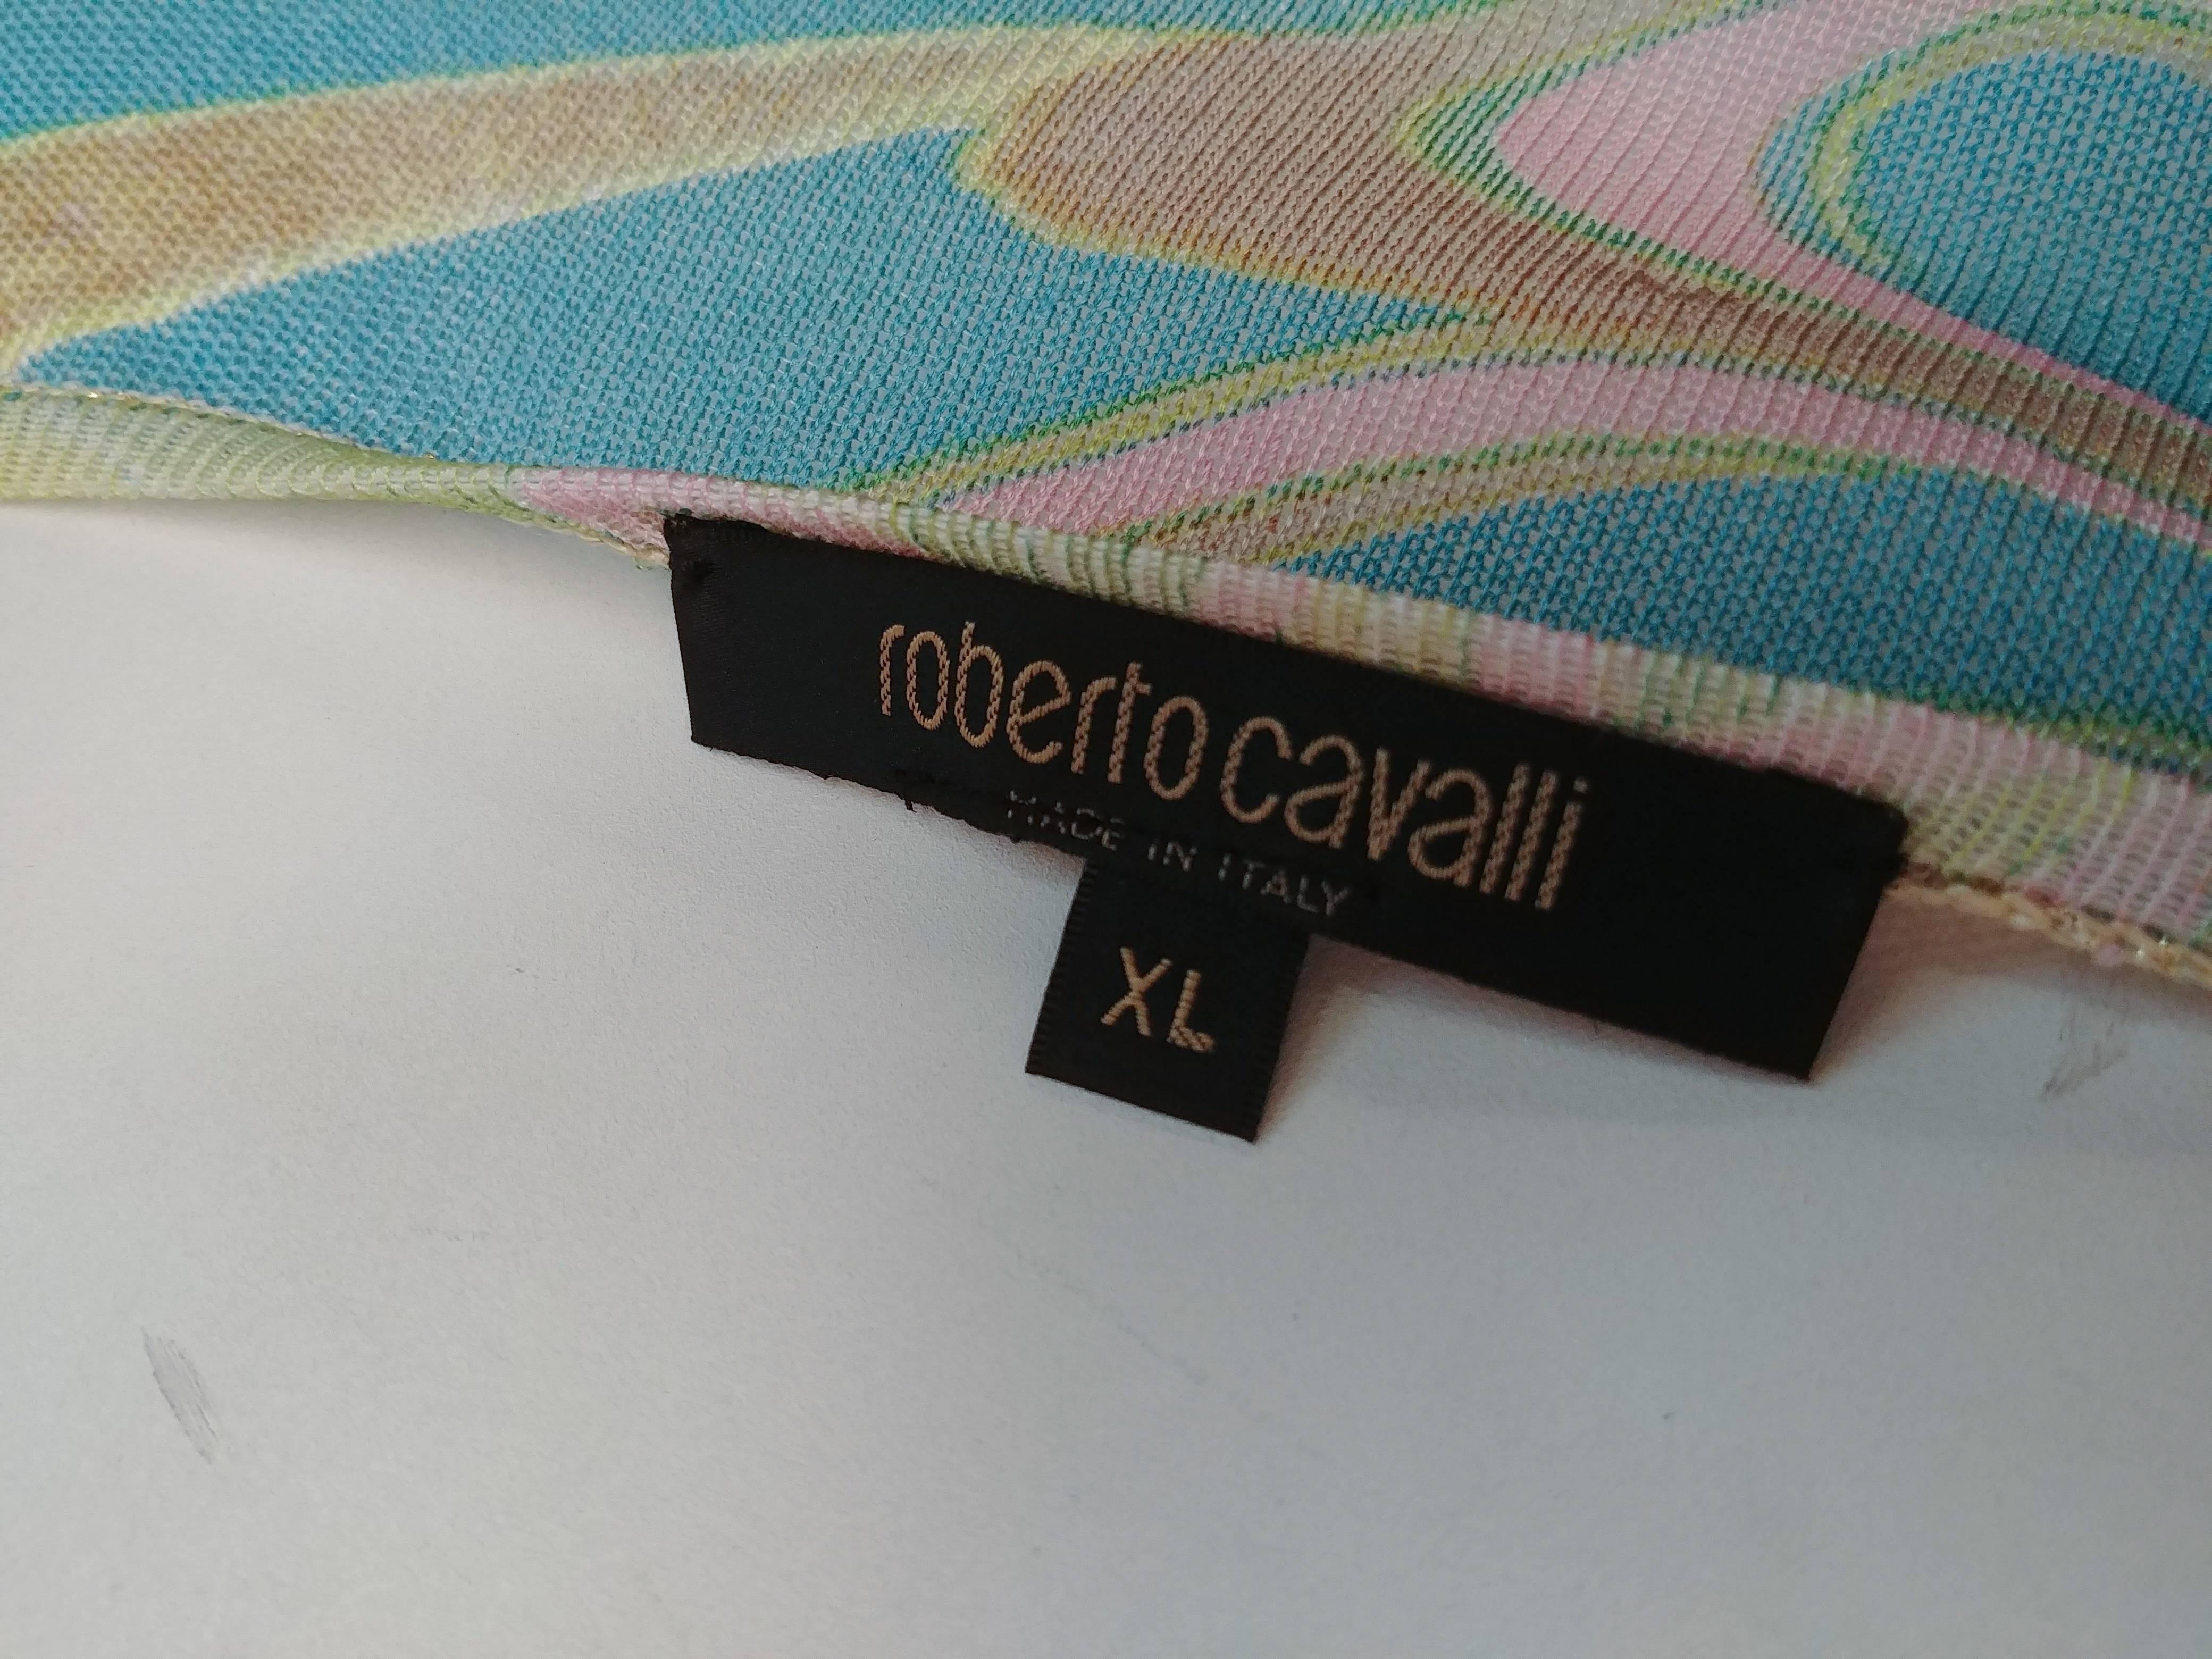 Roberto Cavalli Printed Knit Tank Top For Sale 2